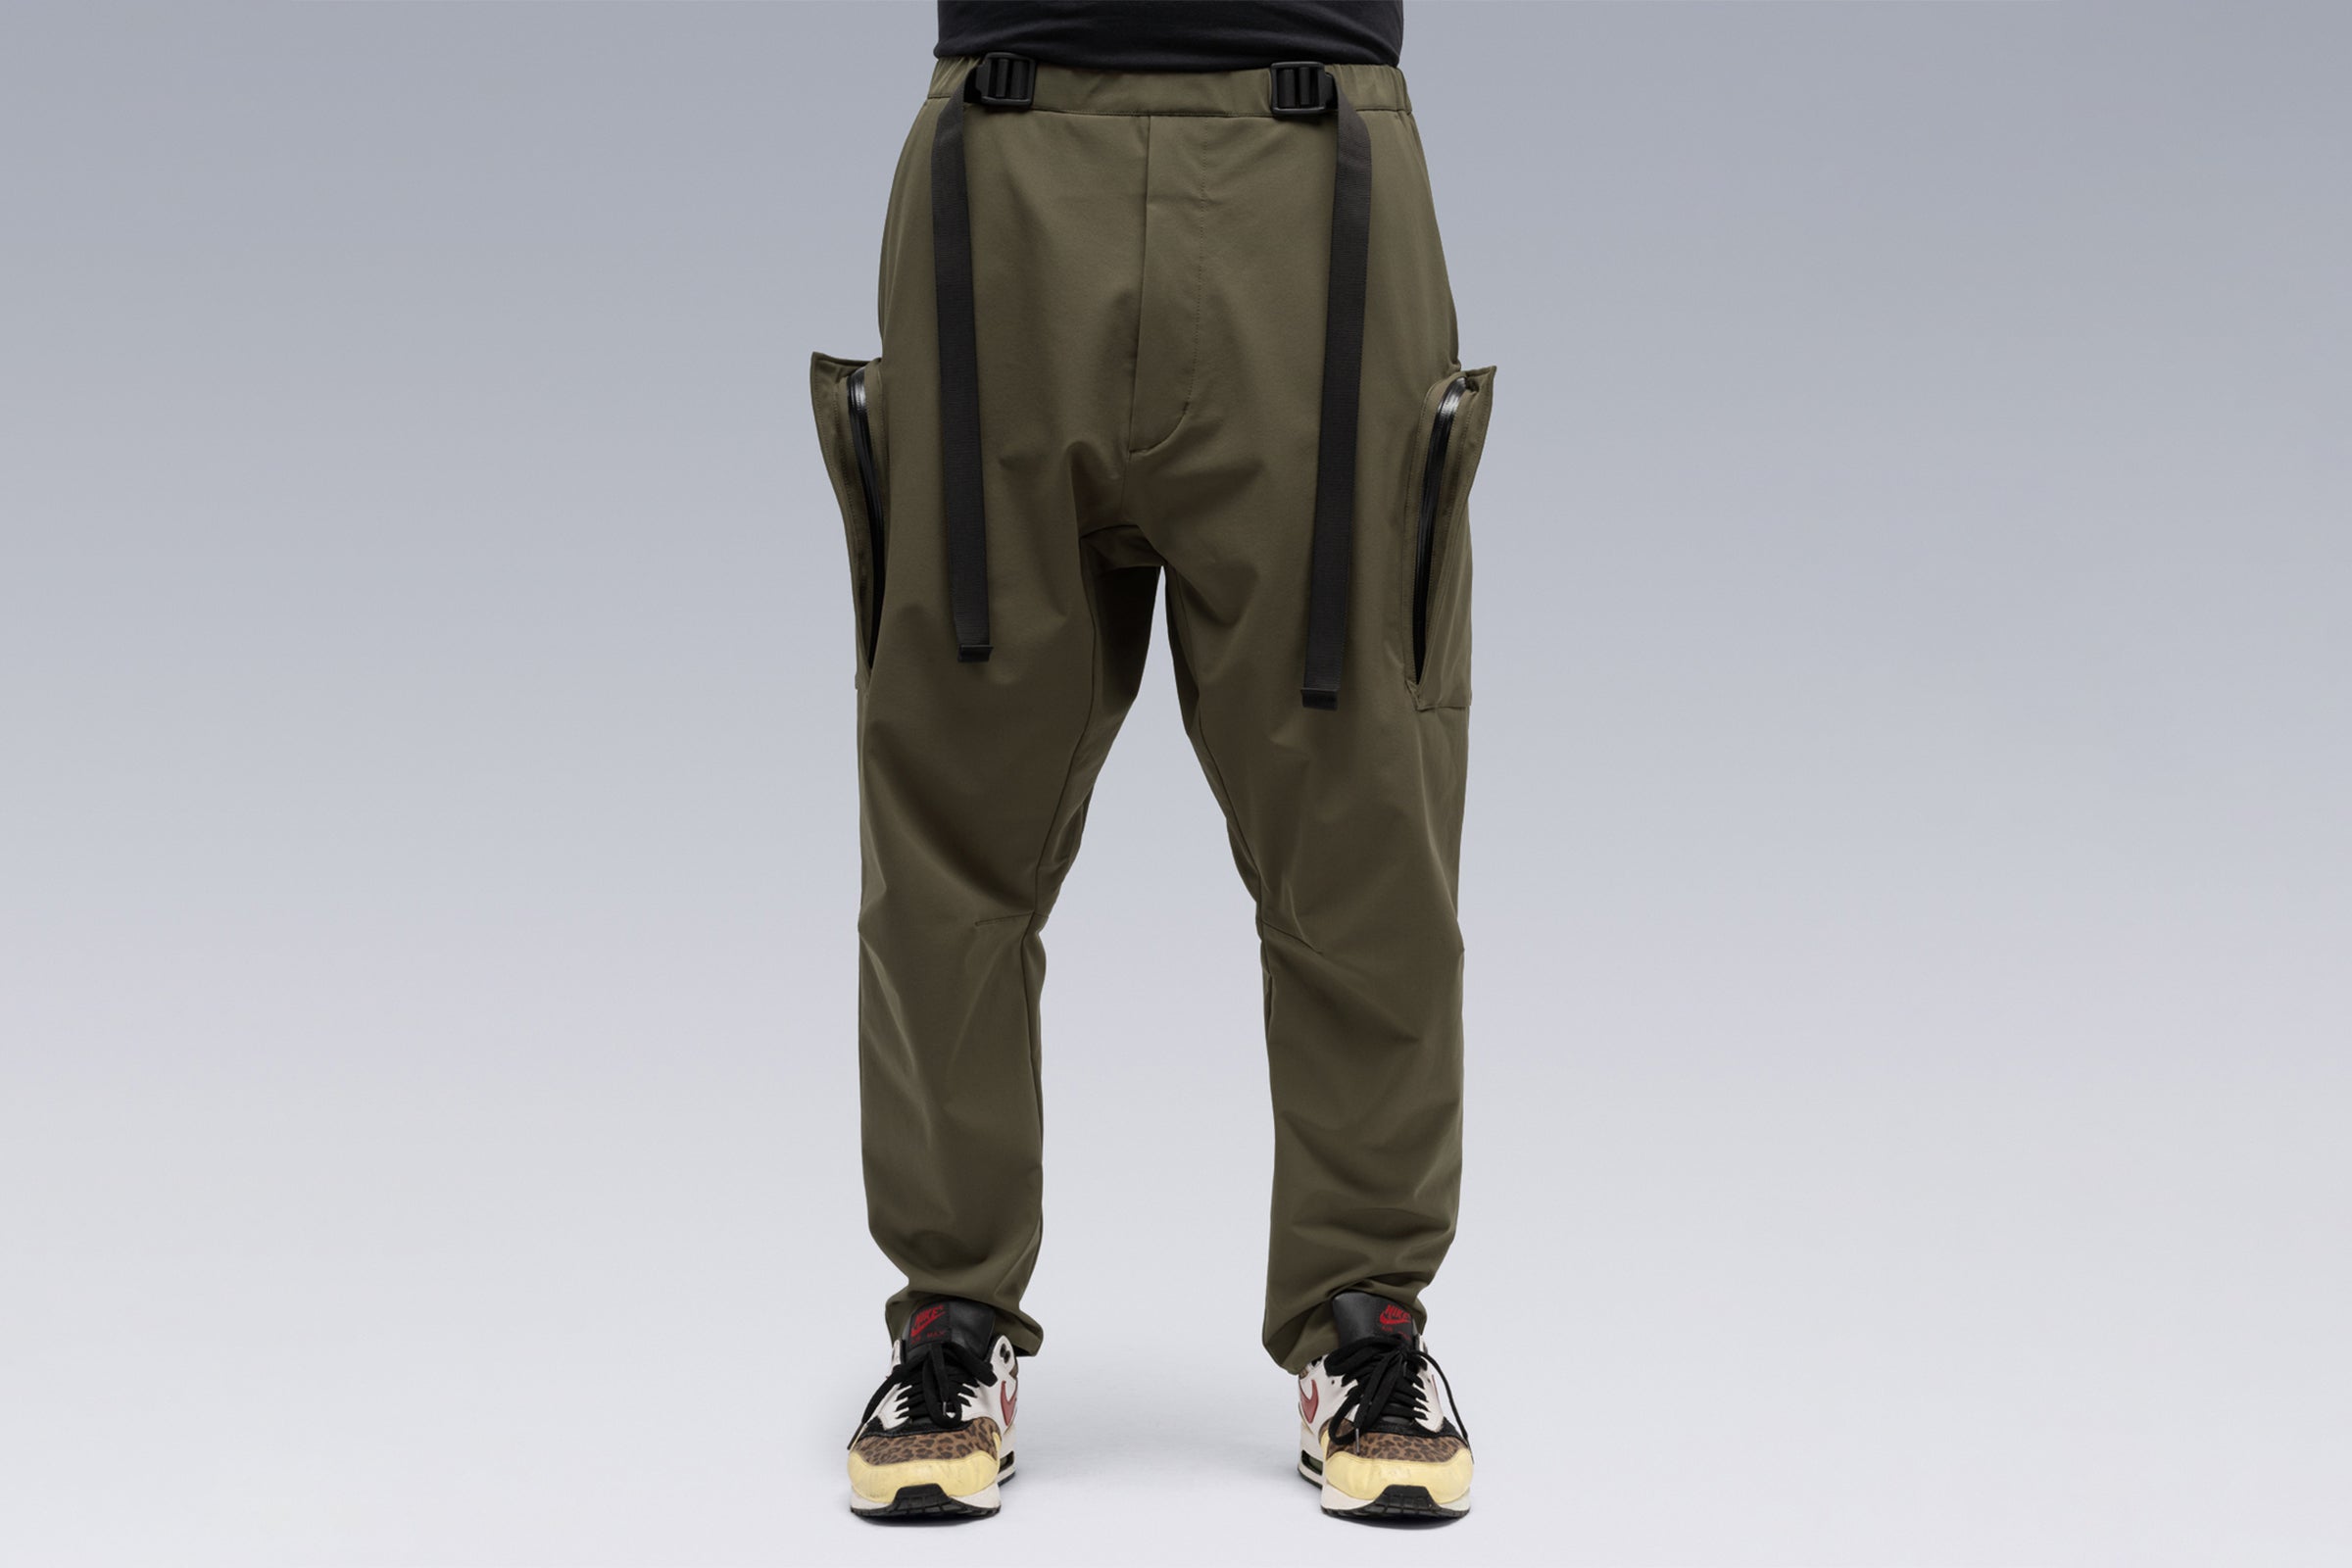 Acronym P31A - Vans Authentic Stretch chino pants in brown - DS